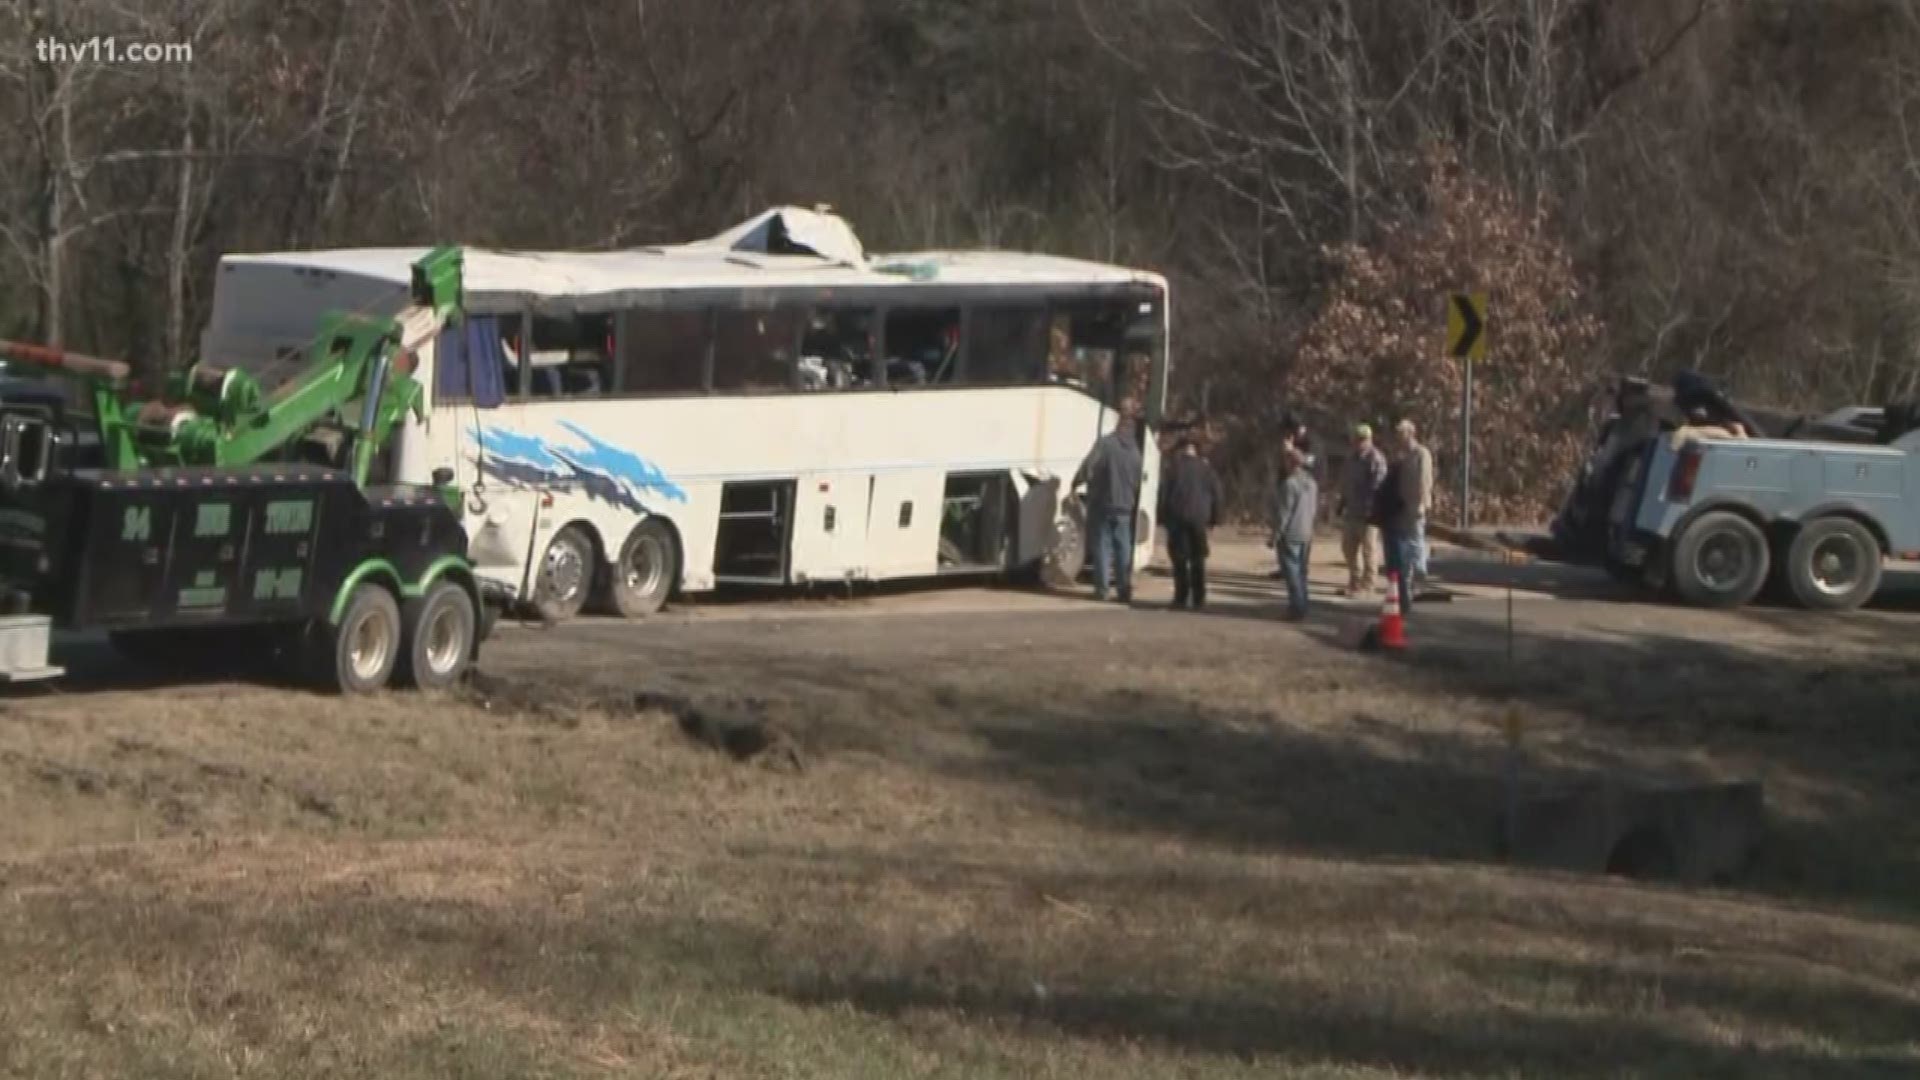 A charter bus carrying a youth football team crashed early this morning, killing 1 child and injuring more than 45 others, mostly children.